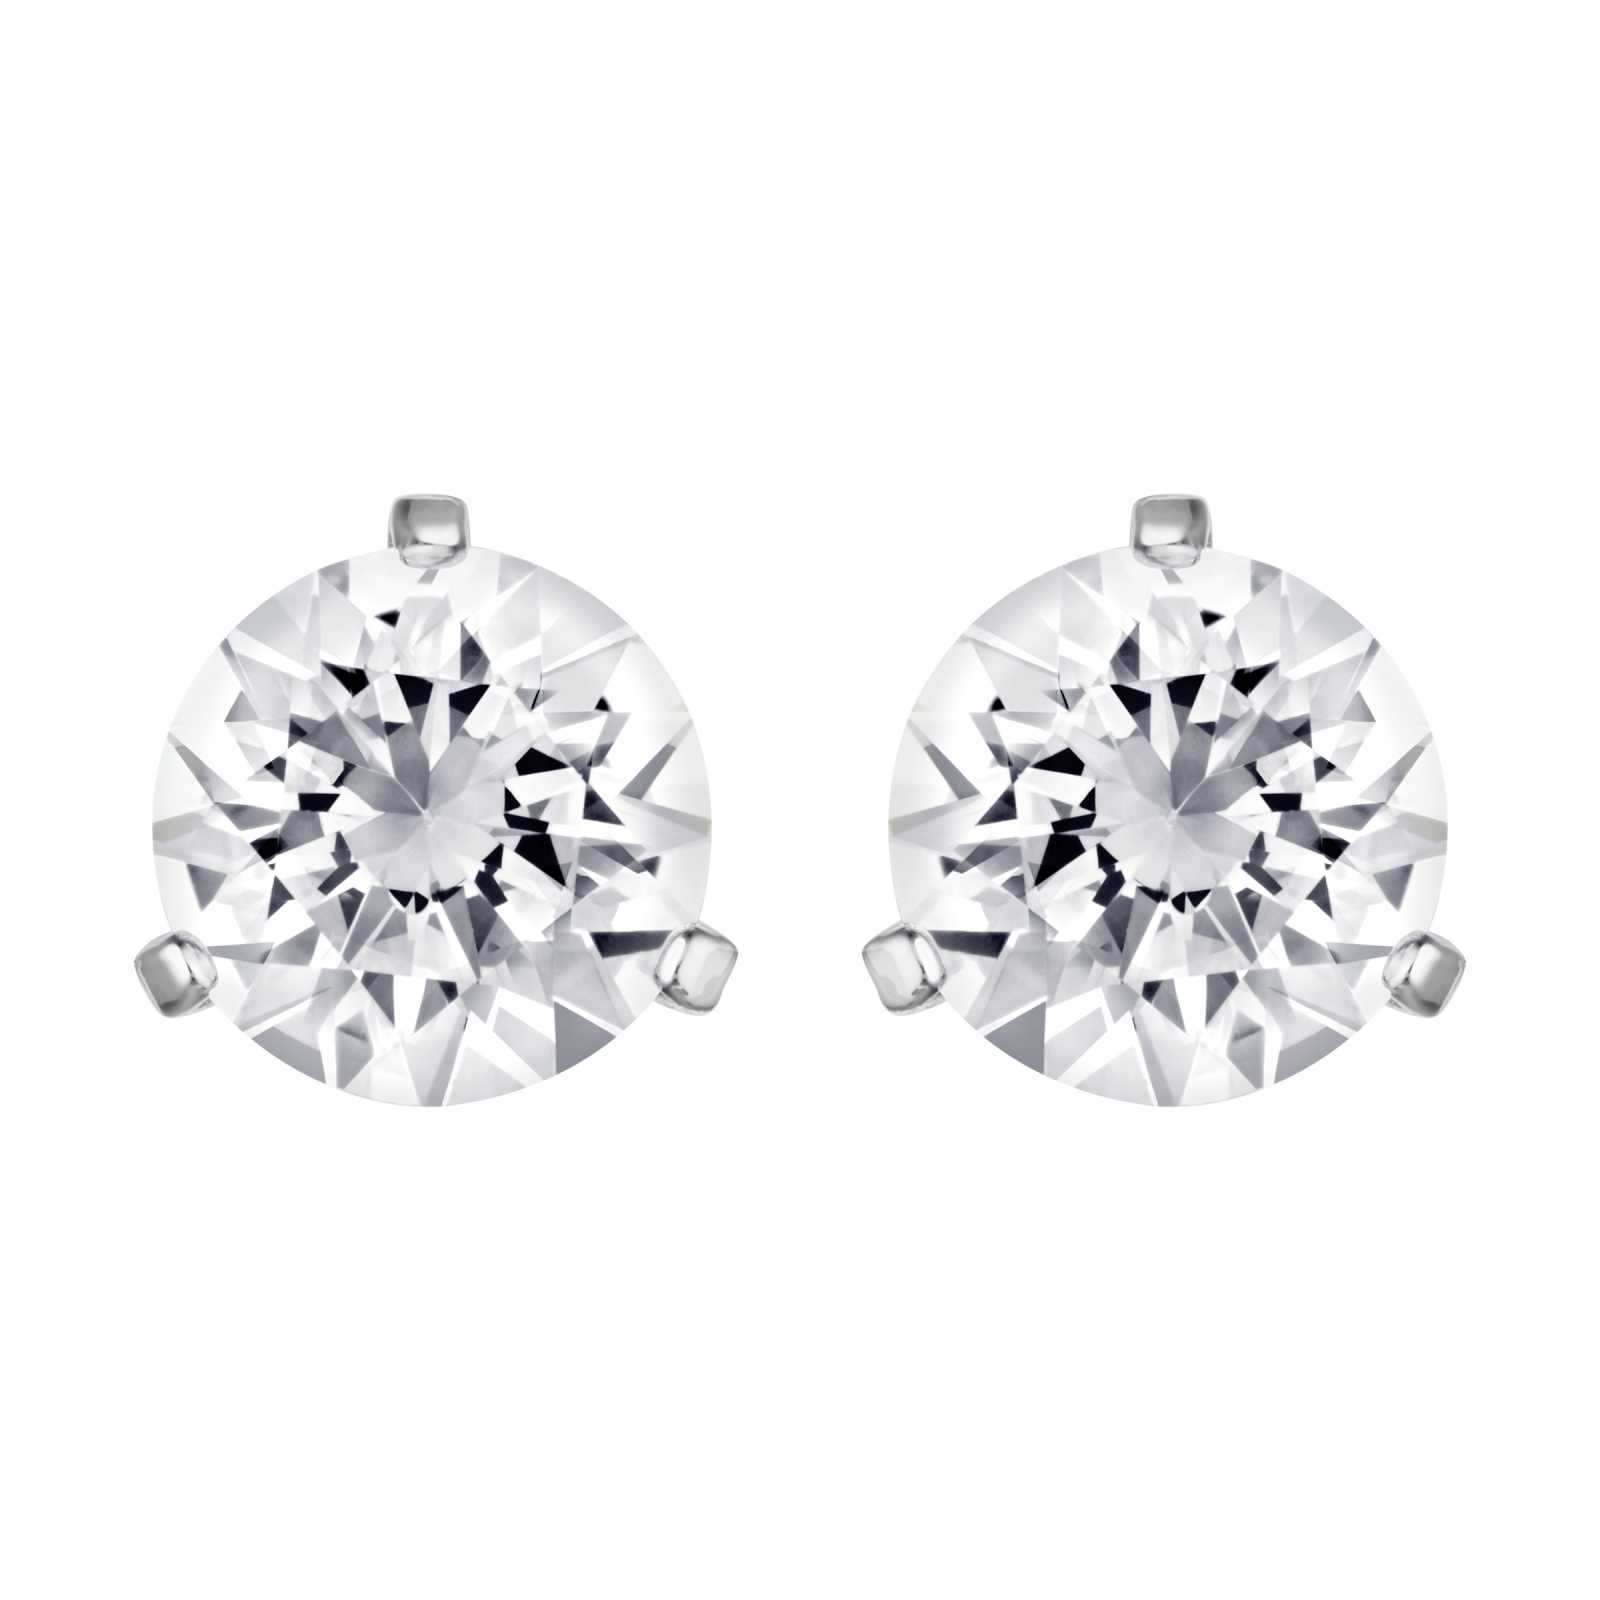 Swarovski Solitaire Round Crystal Stud Earrings, Silver